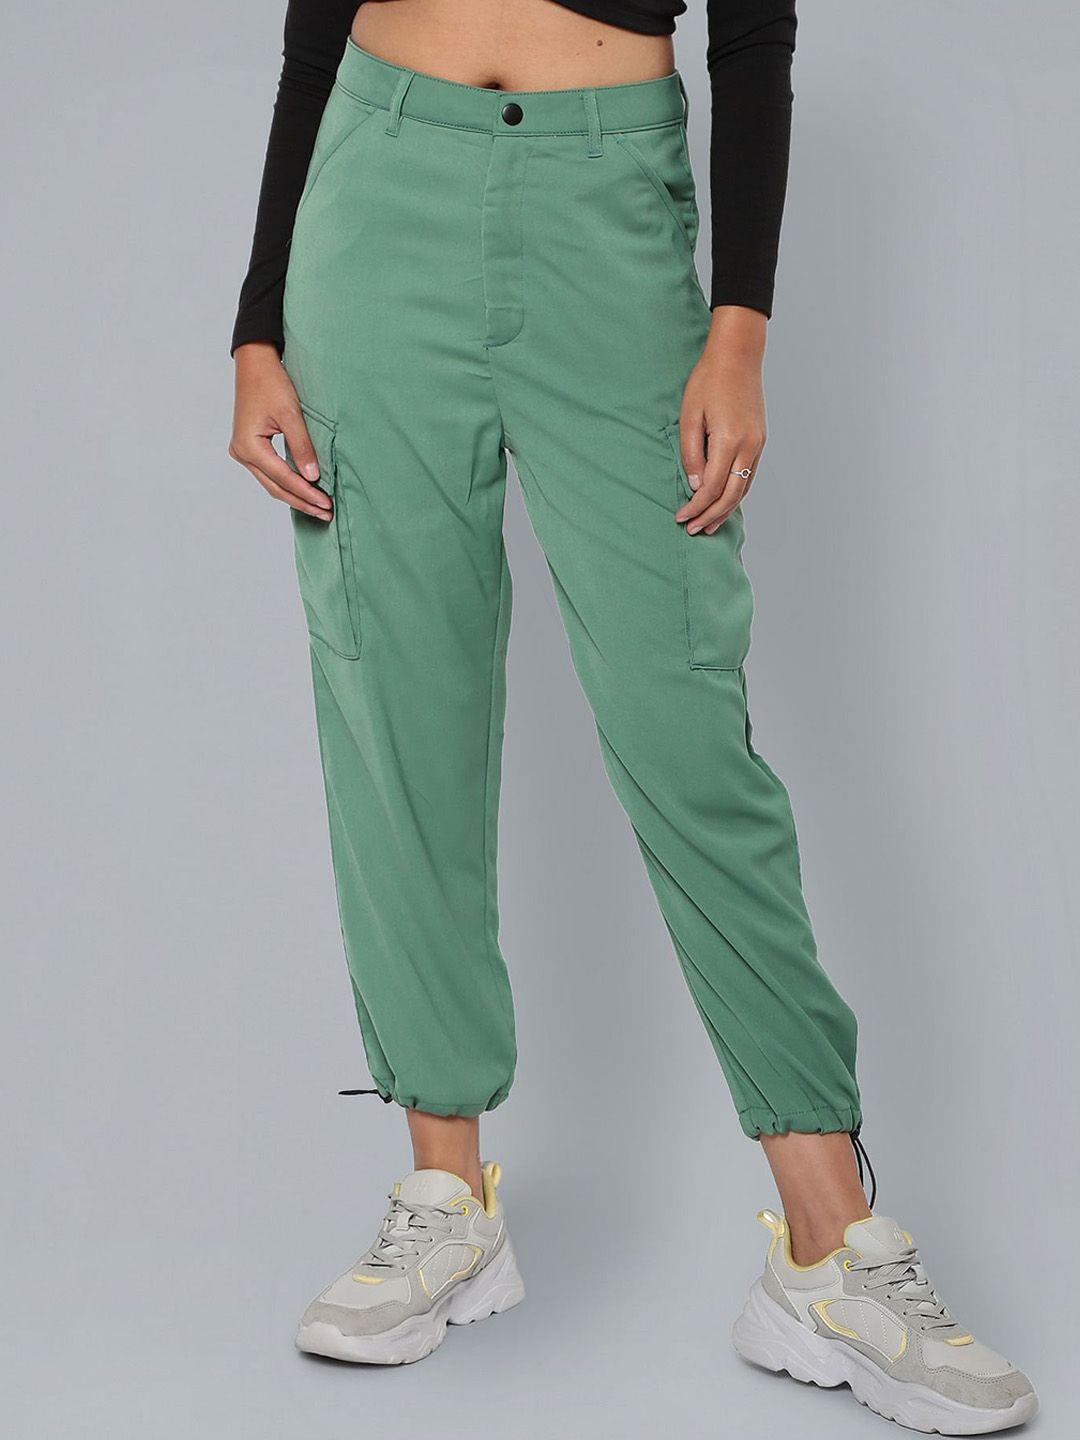 flying-machine-women-mid-rise-cargos-trousers